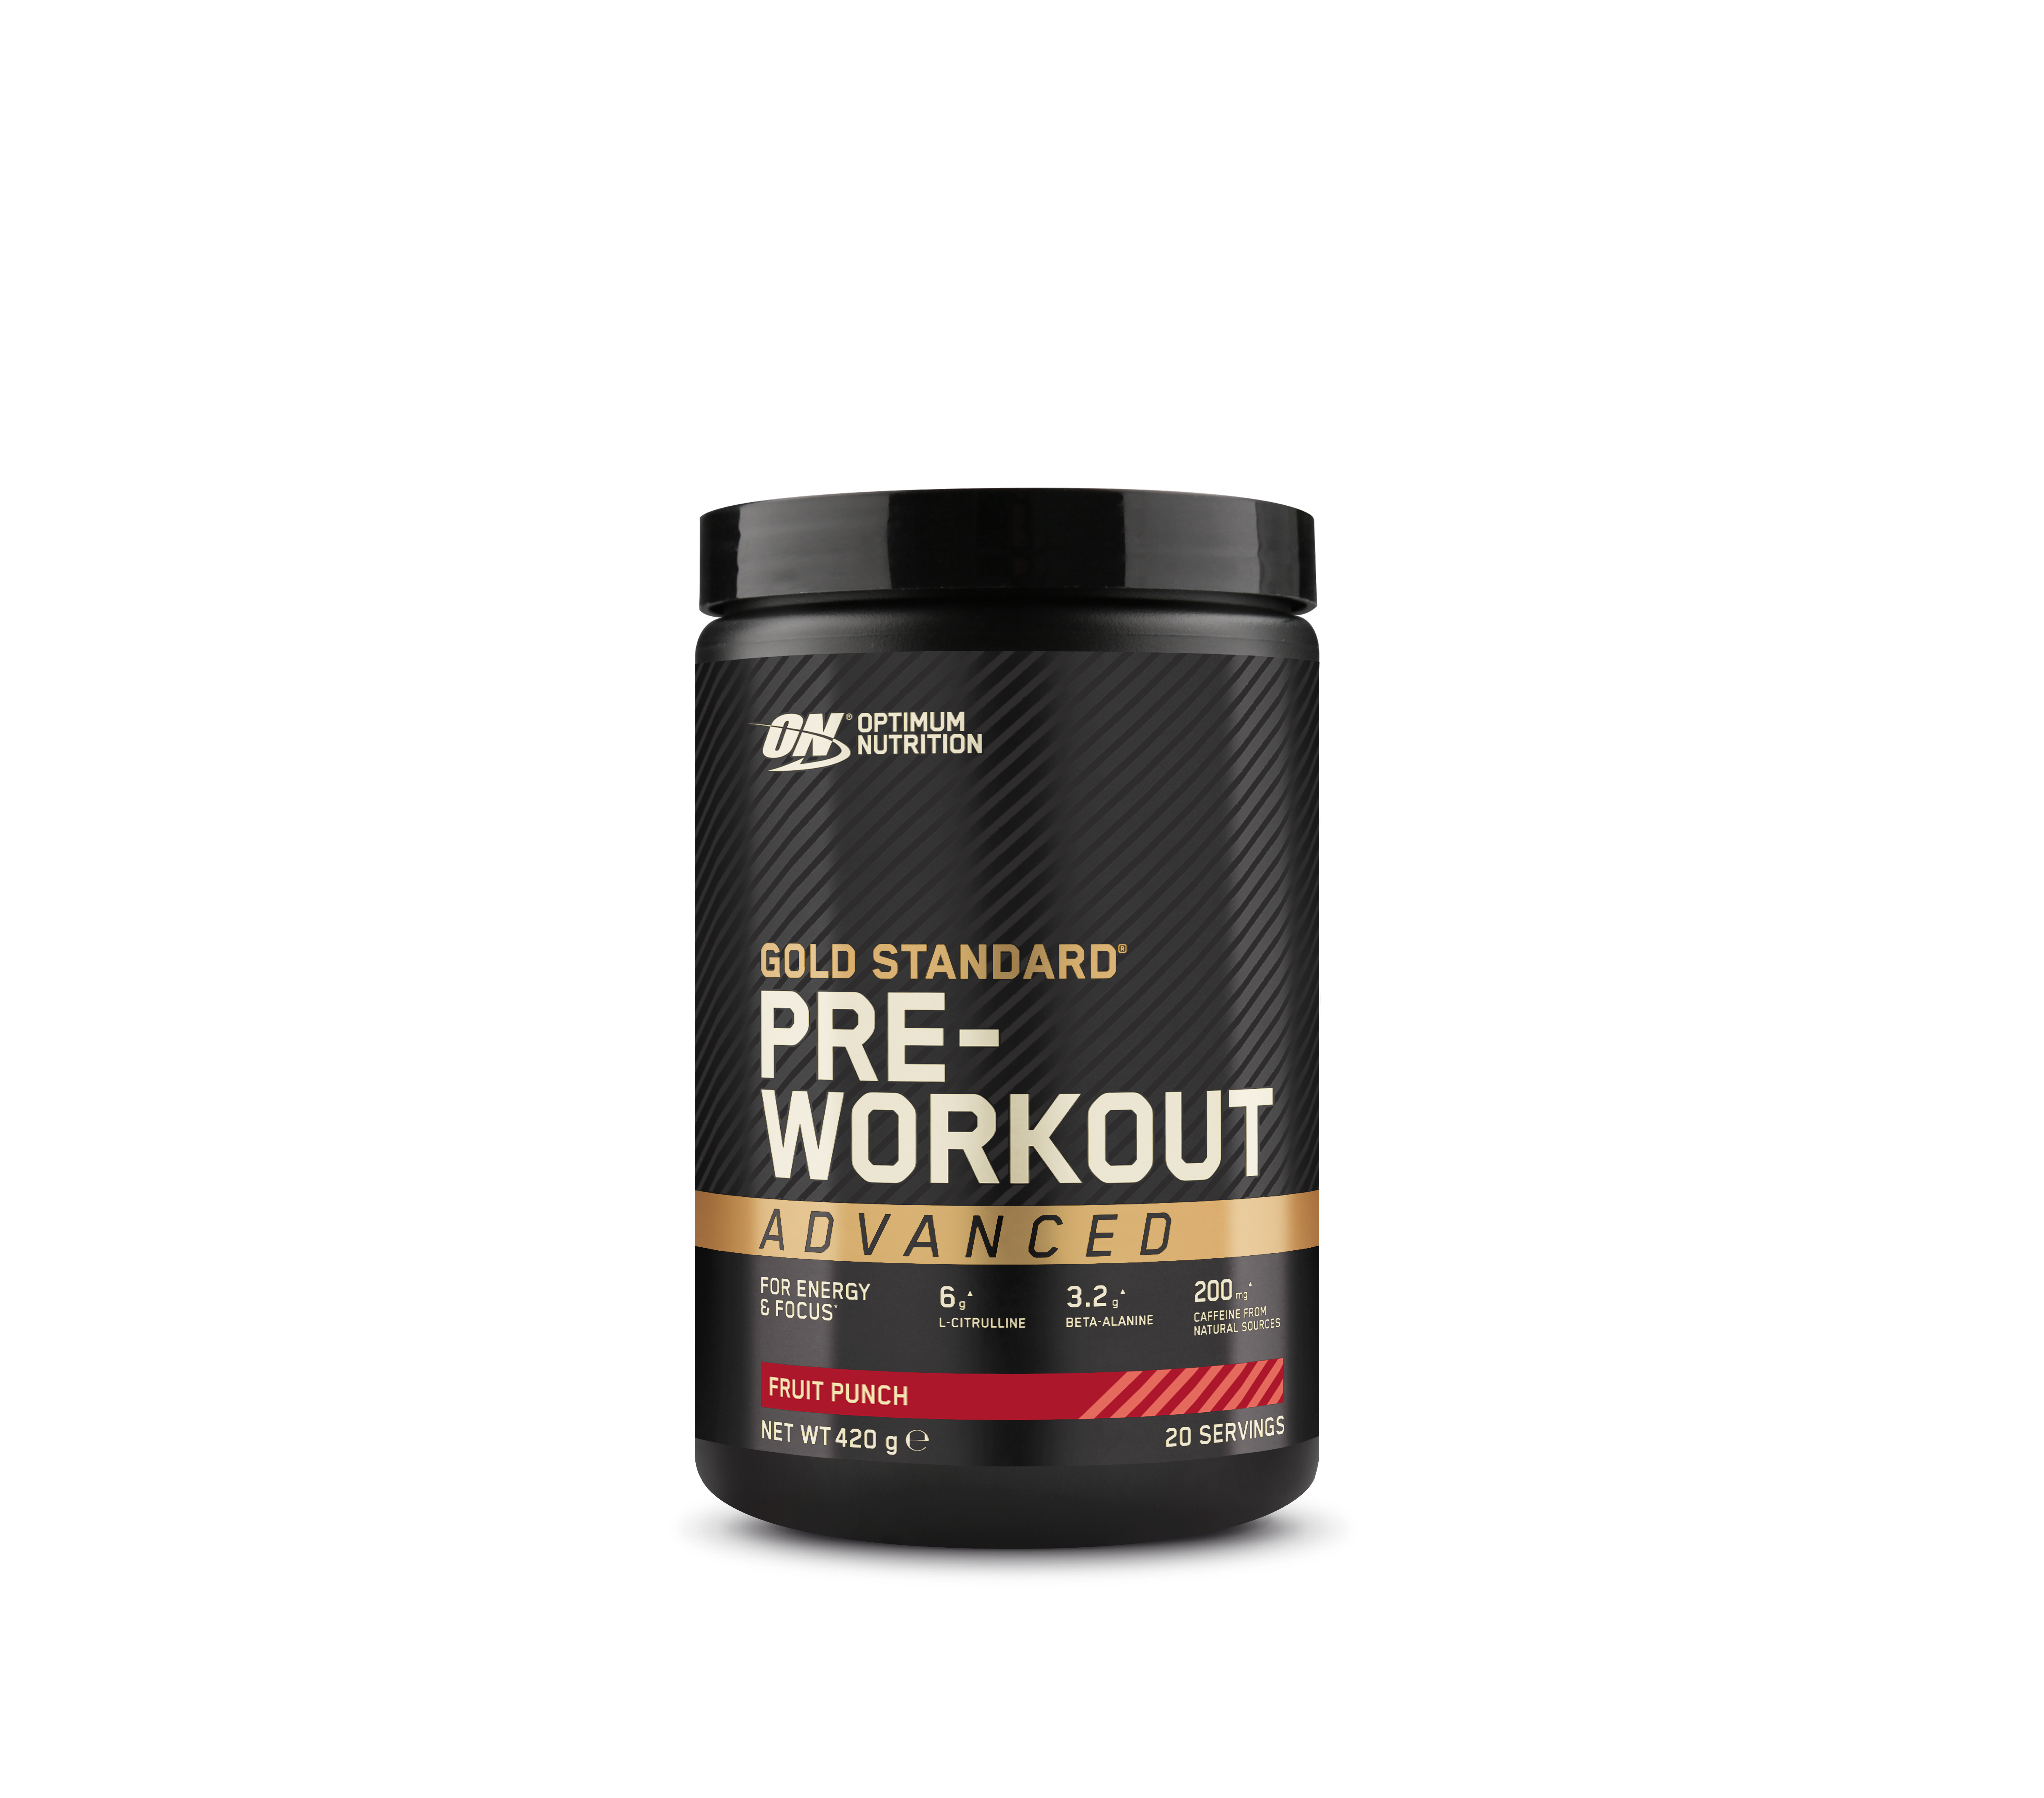 GOLD STANDARD PRE-WORKOUT Advanced fruit punch - ON